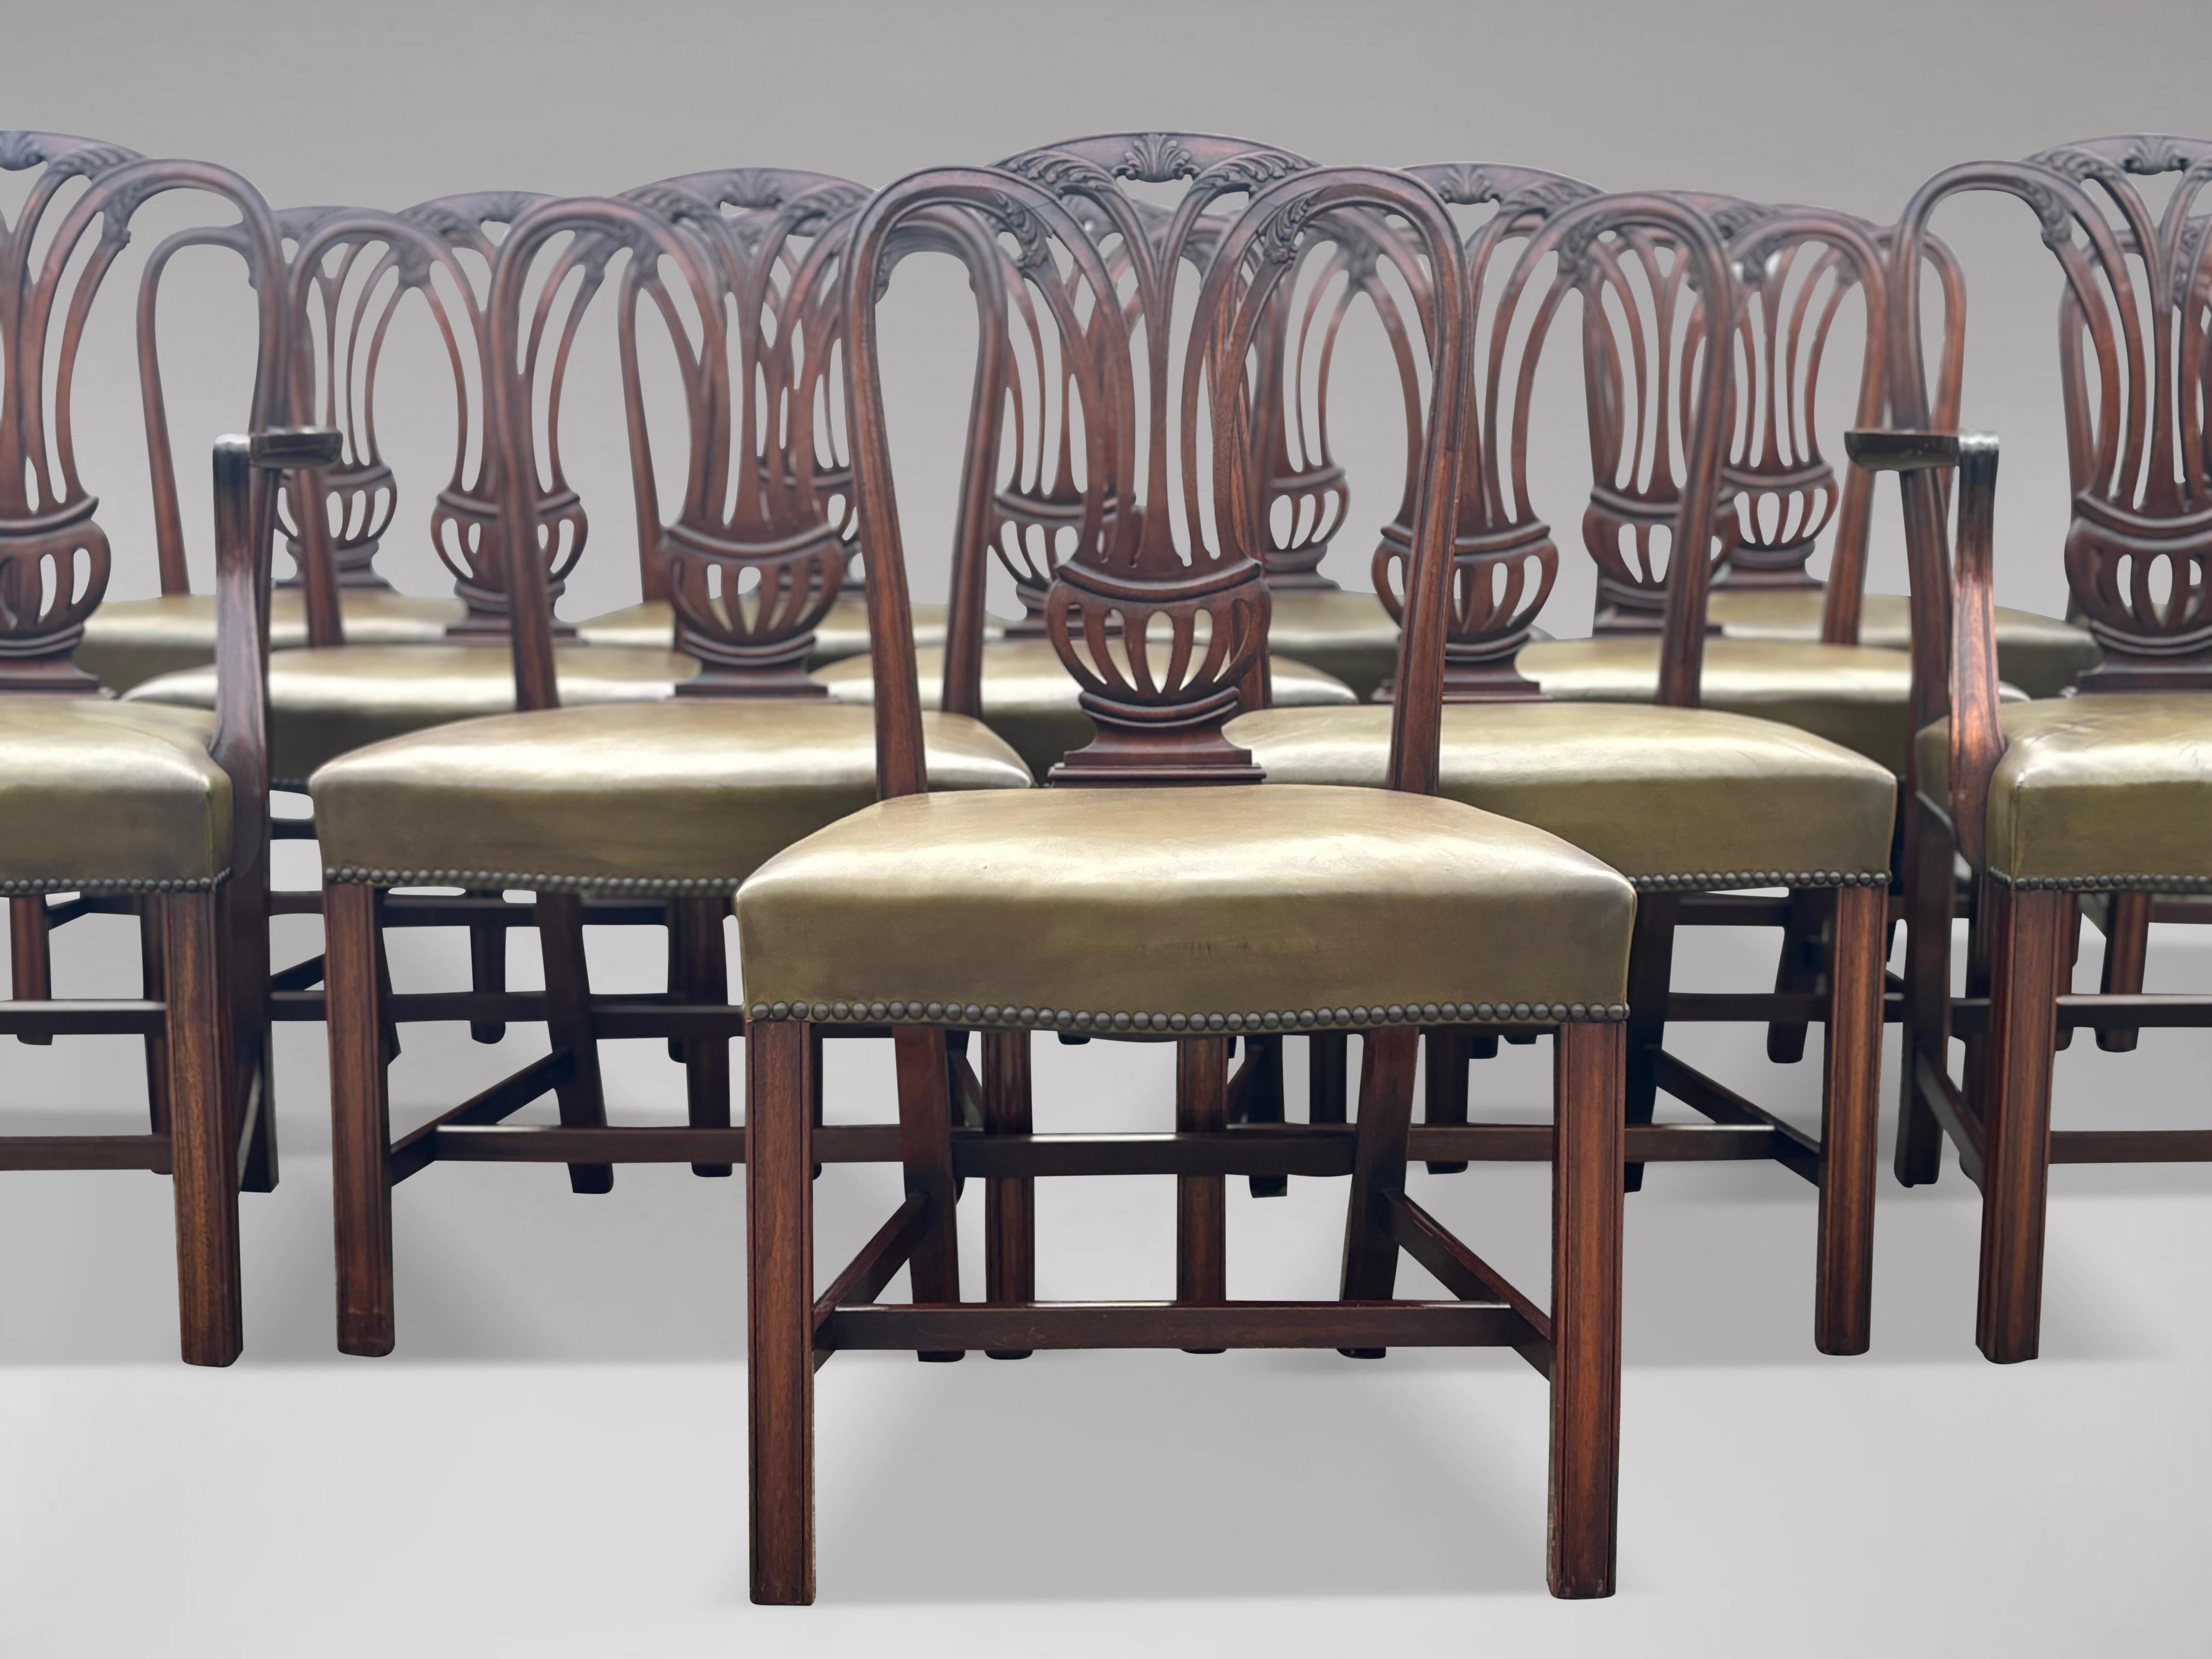 Large Set of 14 Hepplewhite Dining Room Chairs In Good Condition For Sale In Petworth,West Sussex, GB